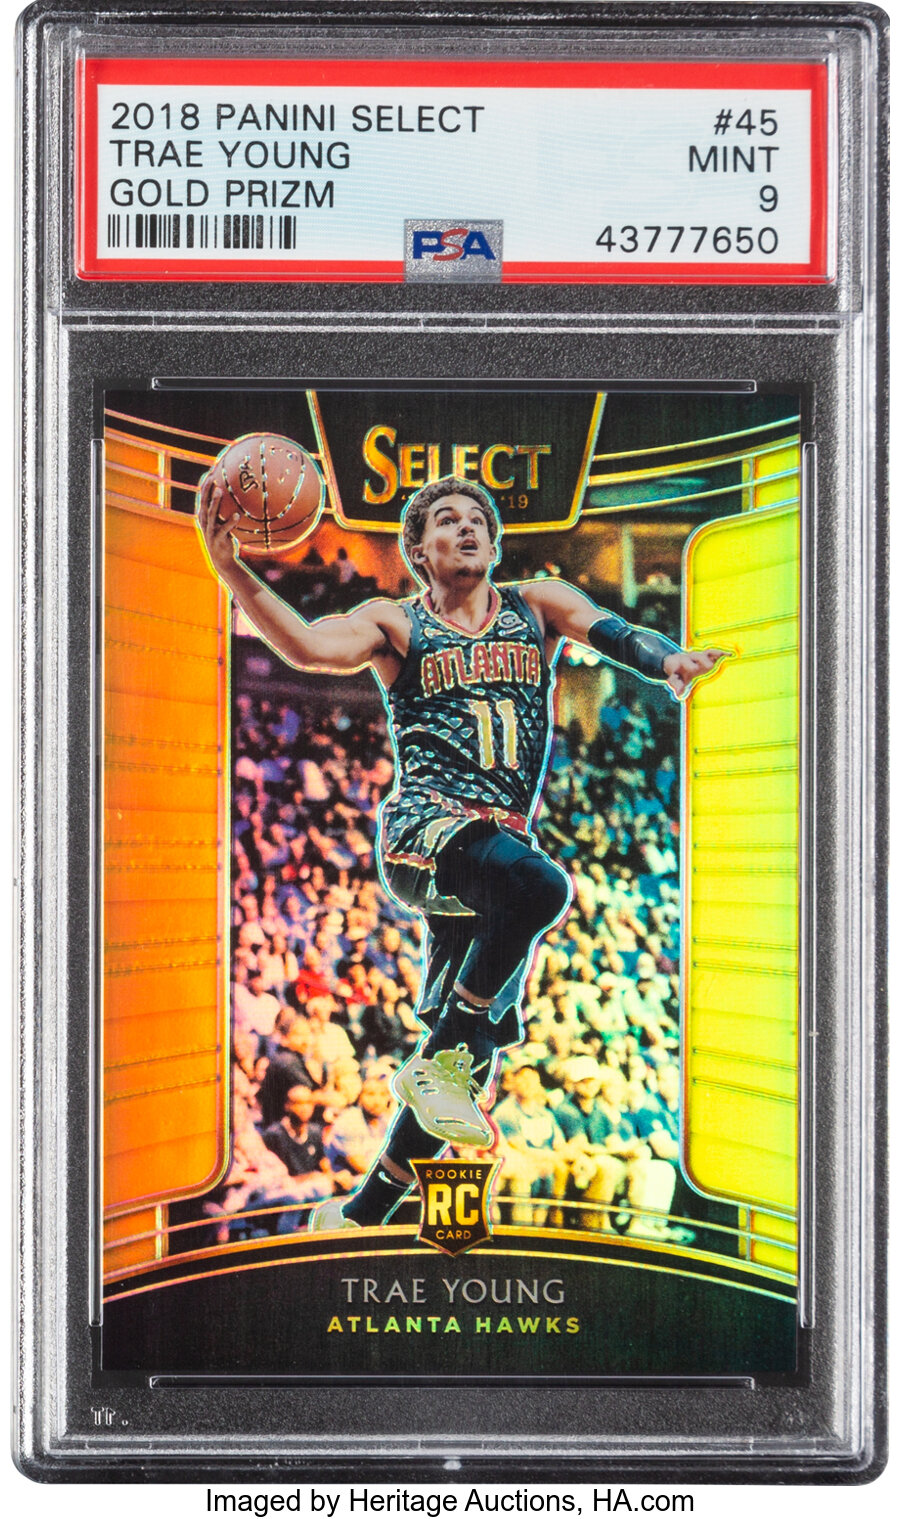 2018 Panini Select Trae Young (Gold Prizm) Rookie #45 PSA Mint 9 - #7/10